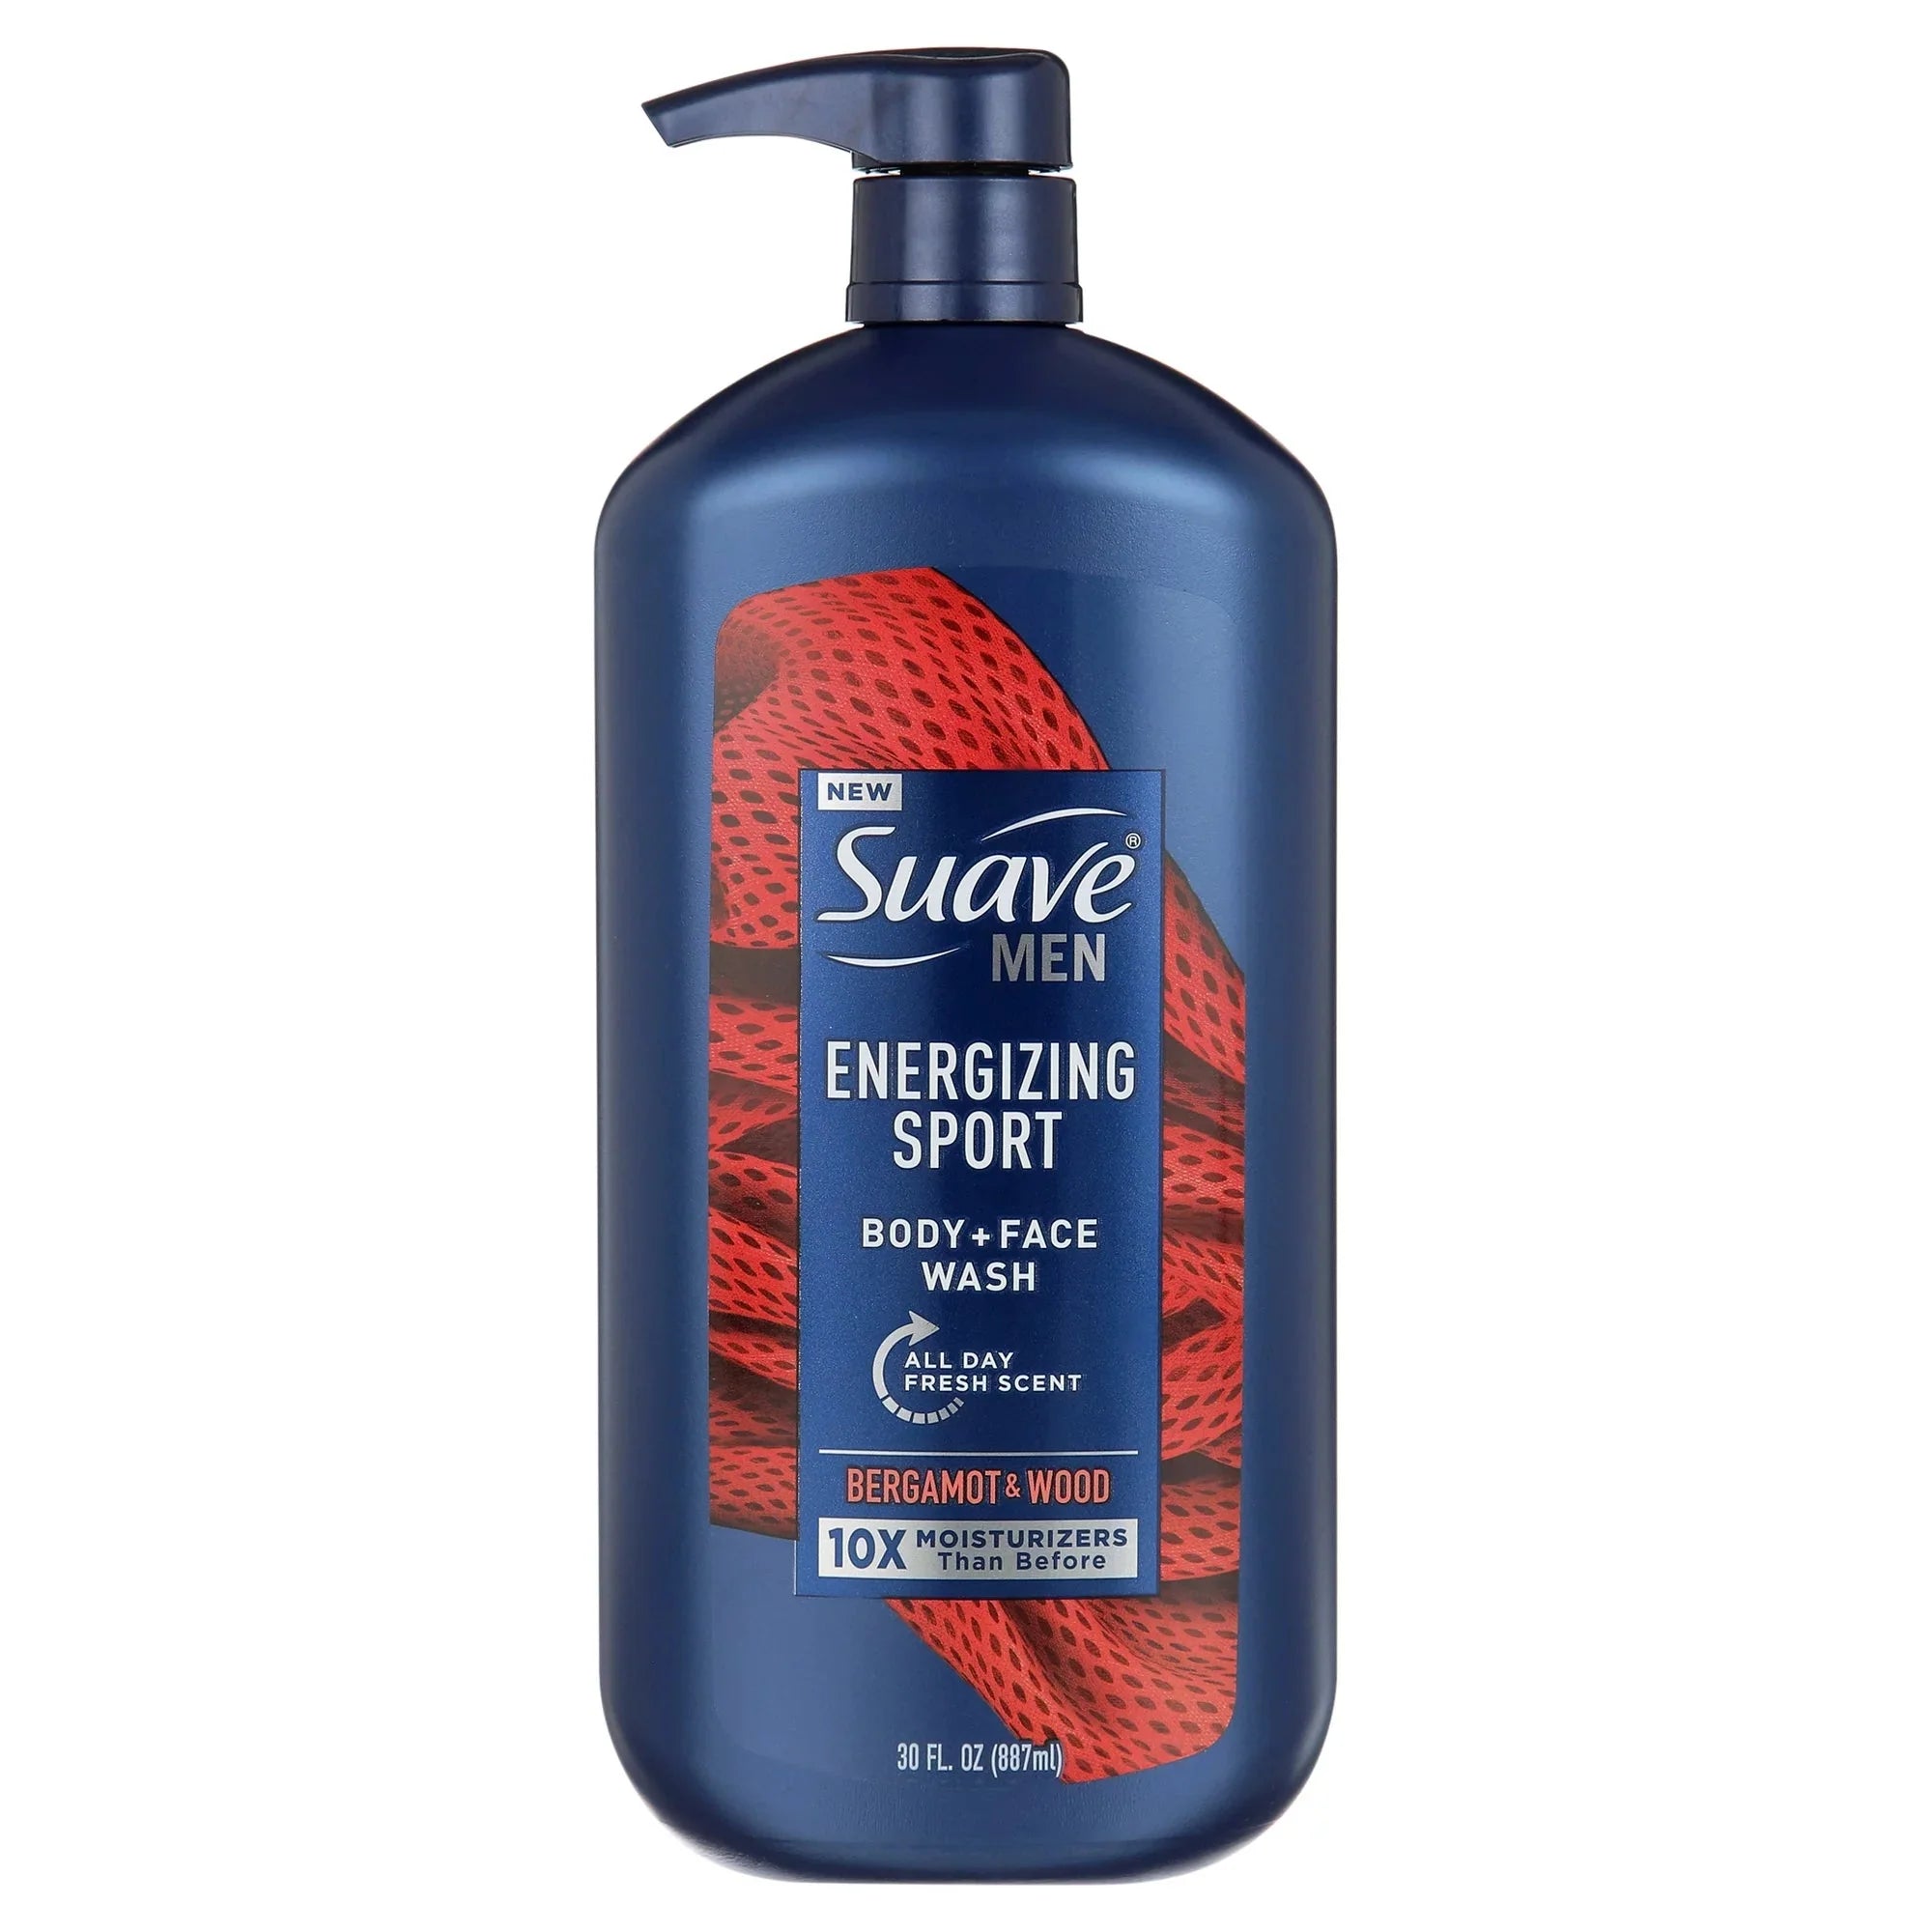 Wholesale prices with free shipping all over United States Suave Men Face & Body Wash, Energizing Sport, All Skin Types 30 oz - Steven Deals